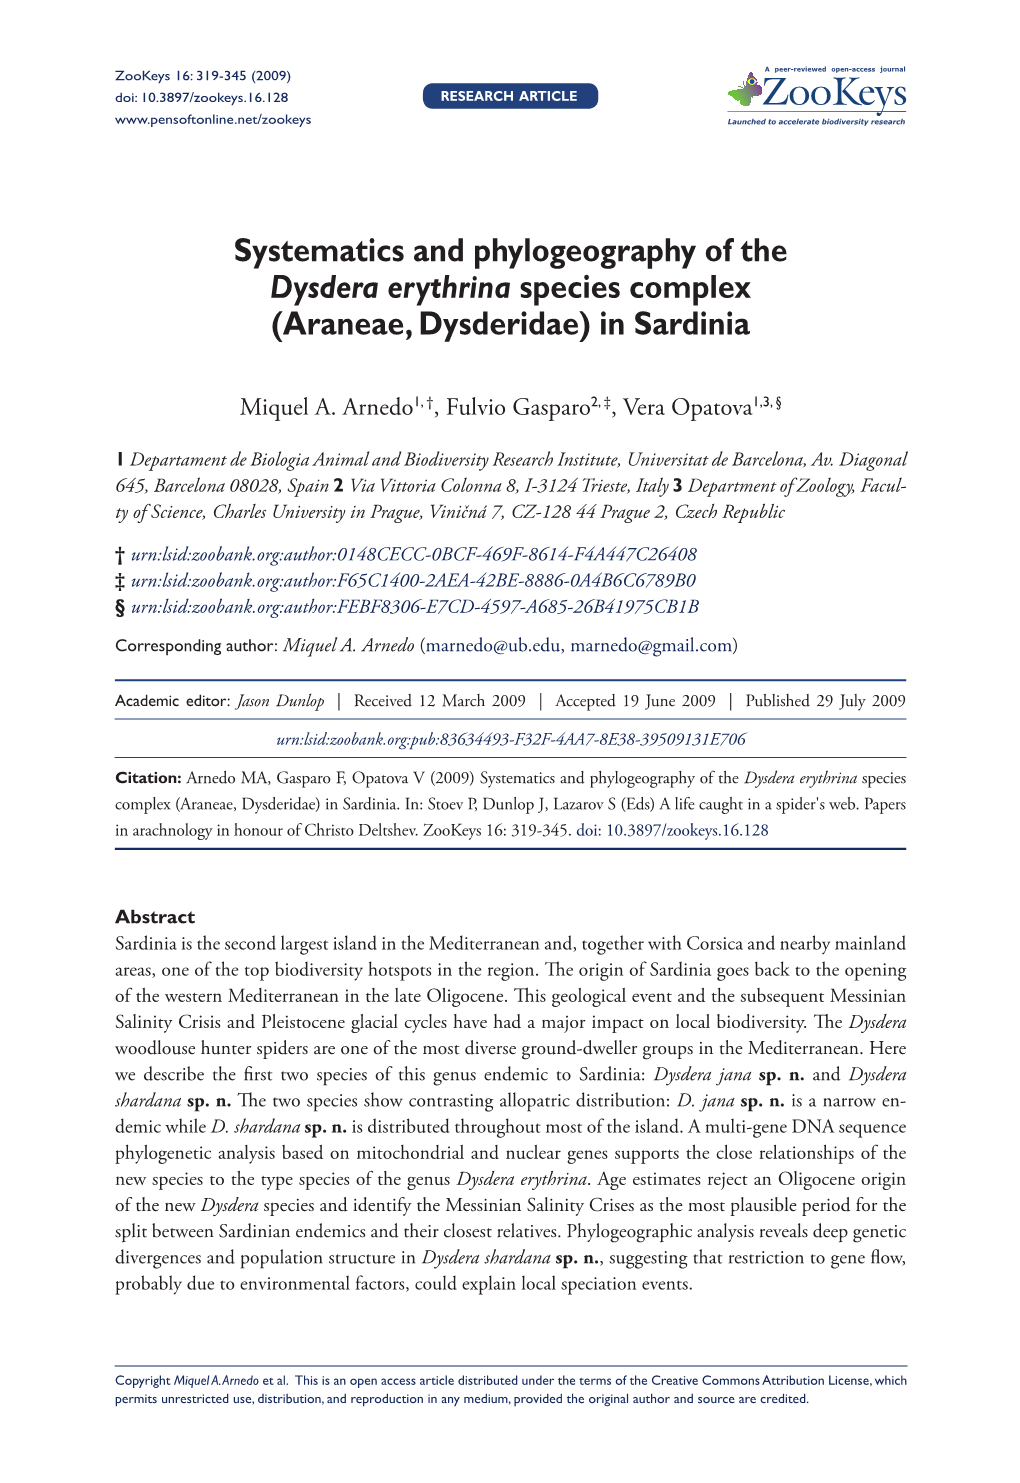 Systematics and Phylogeography of the Dysdera Erythrina Species Complex (Araneae, Dysderidae) in Sardinia